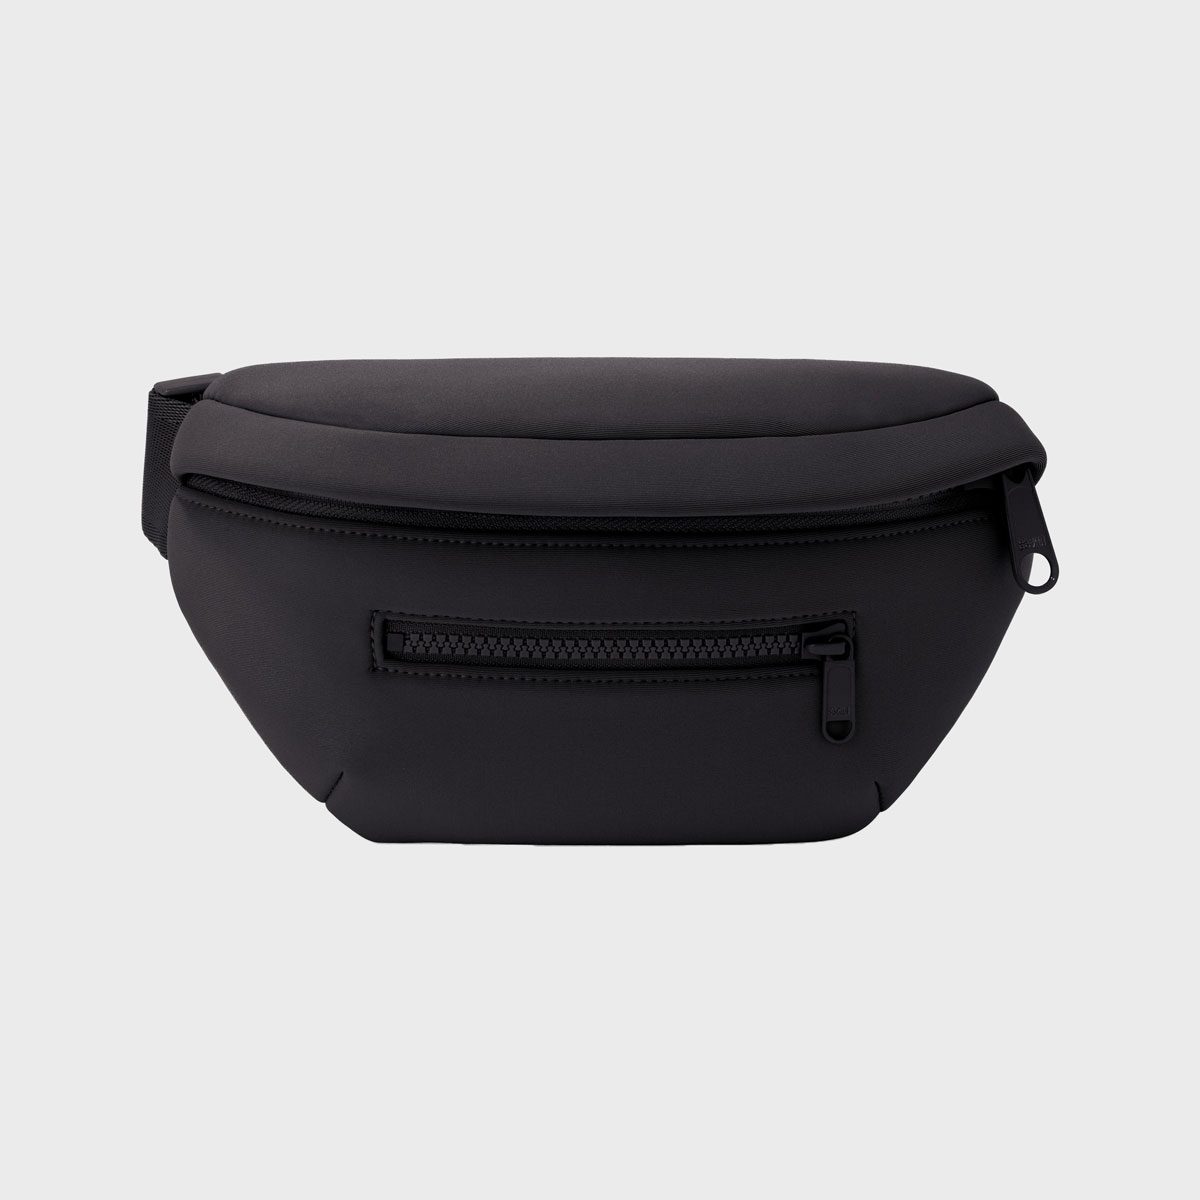 12 Belt Bags for Casual, Trendy Style and Hands-Free Travel